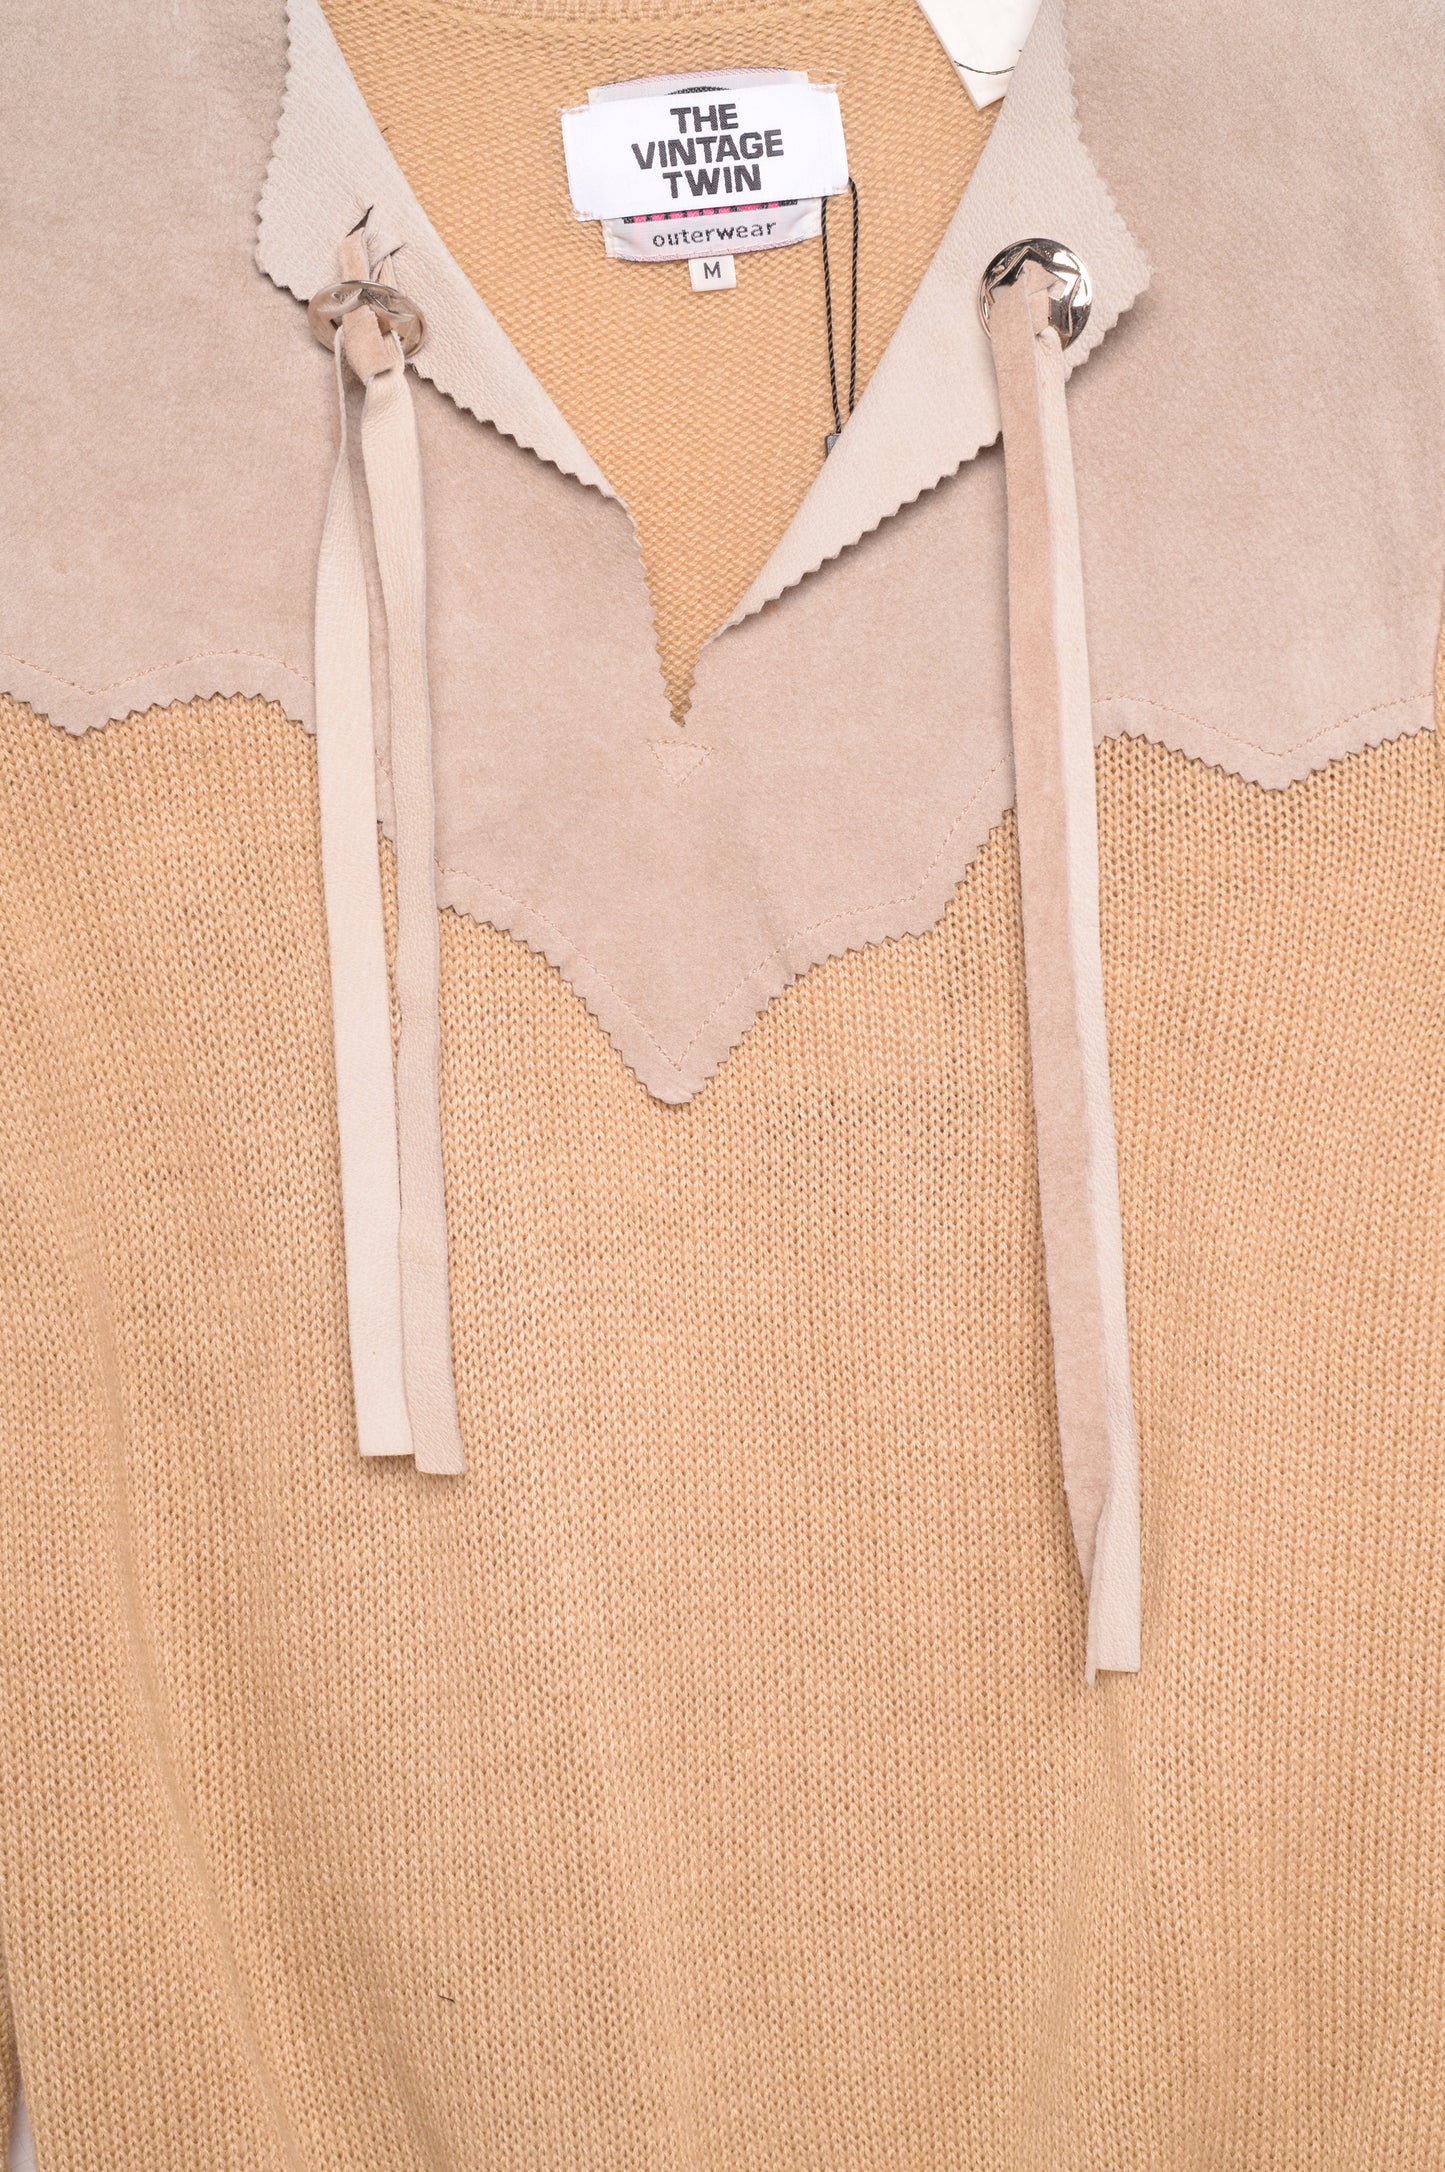 1970s Suede Panel Sweater